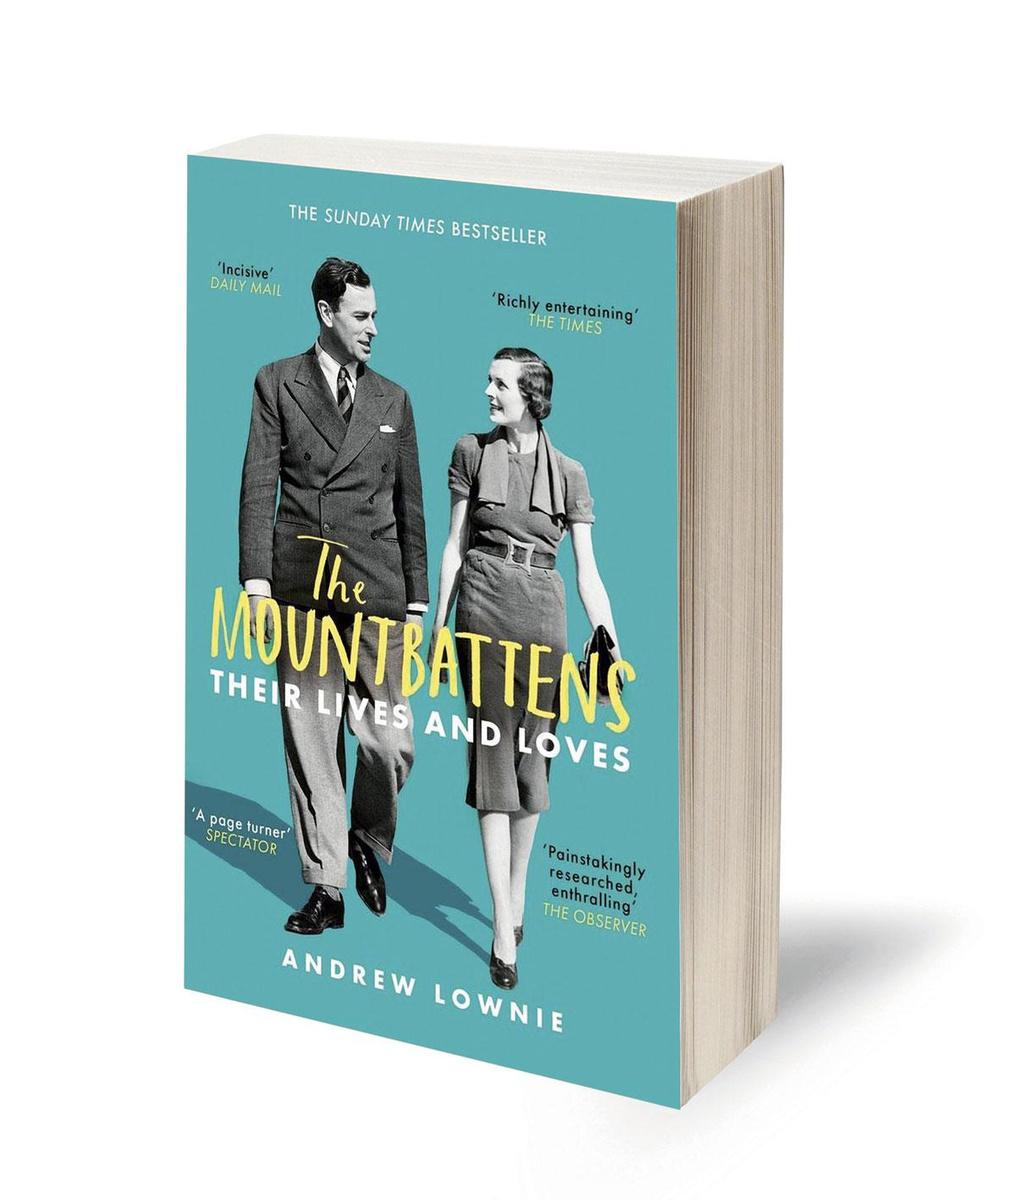 Andrew Lownie, The Mountbattens. Their Lives and Loves, Bonnier Books, 496 blz, 25 euro